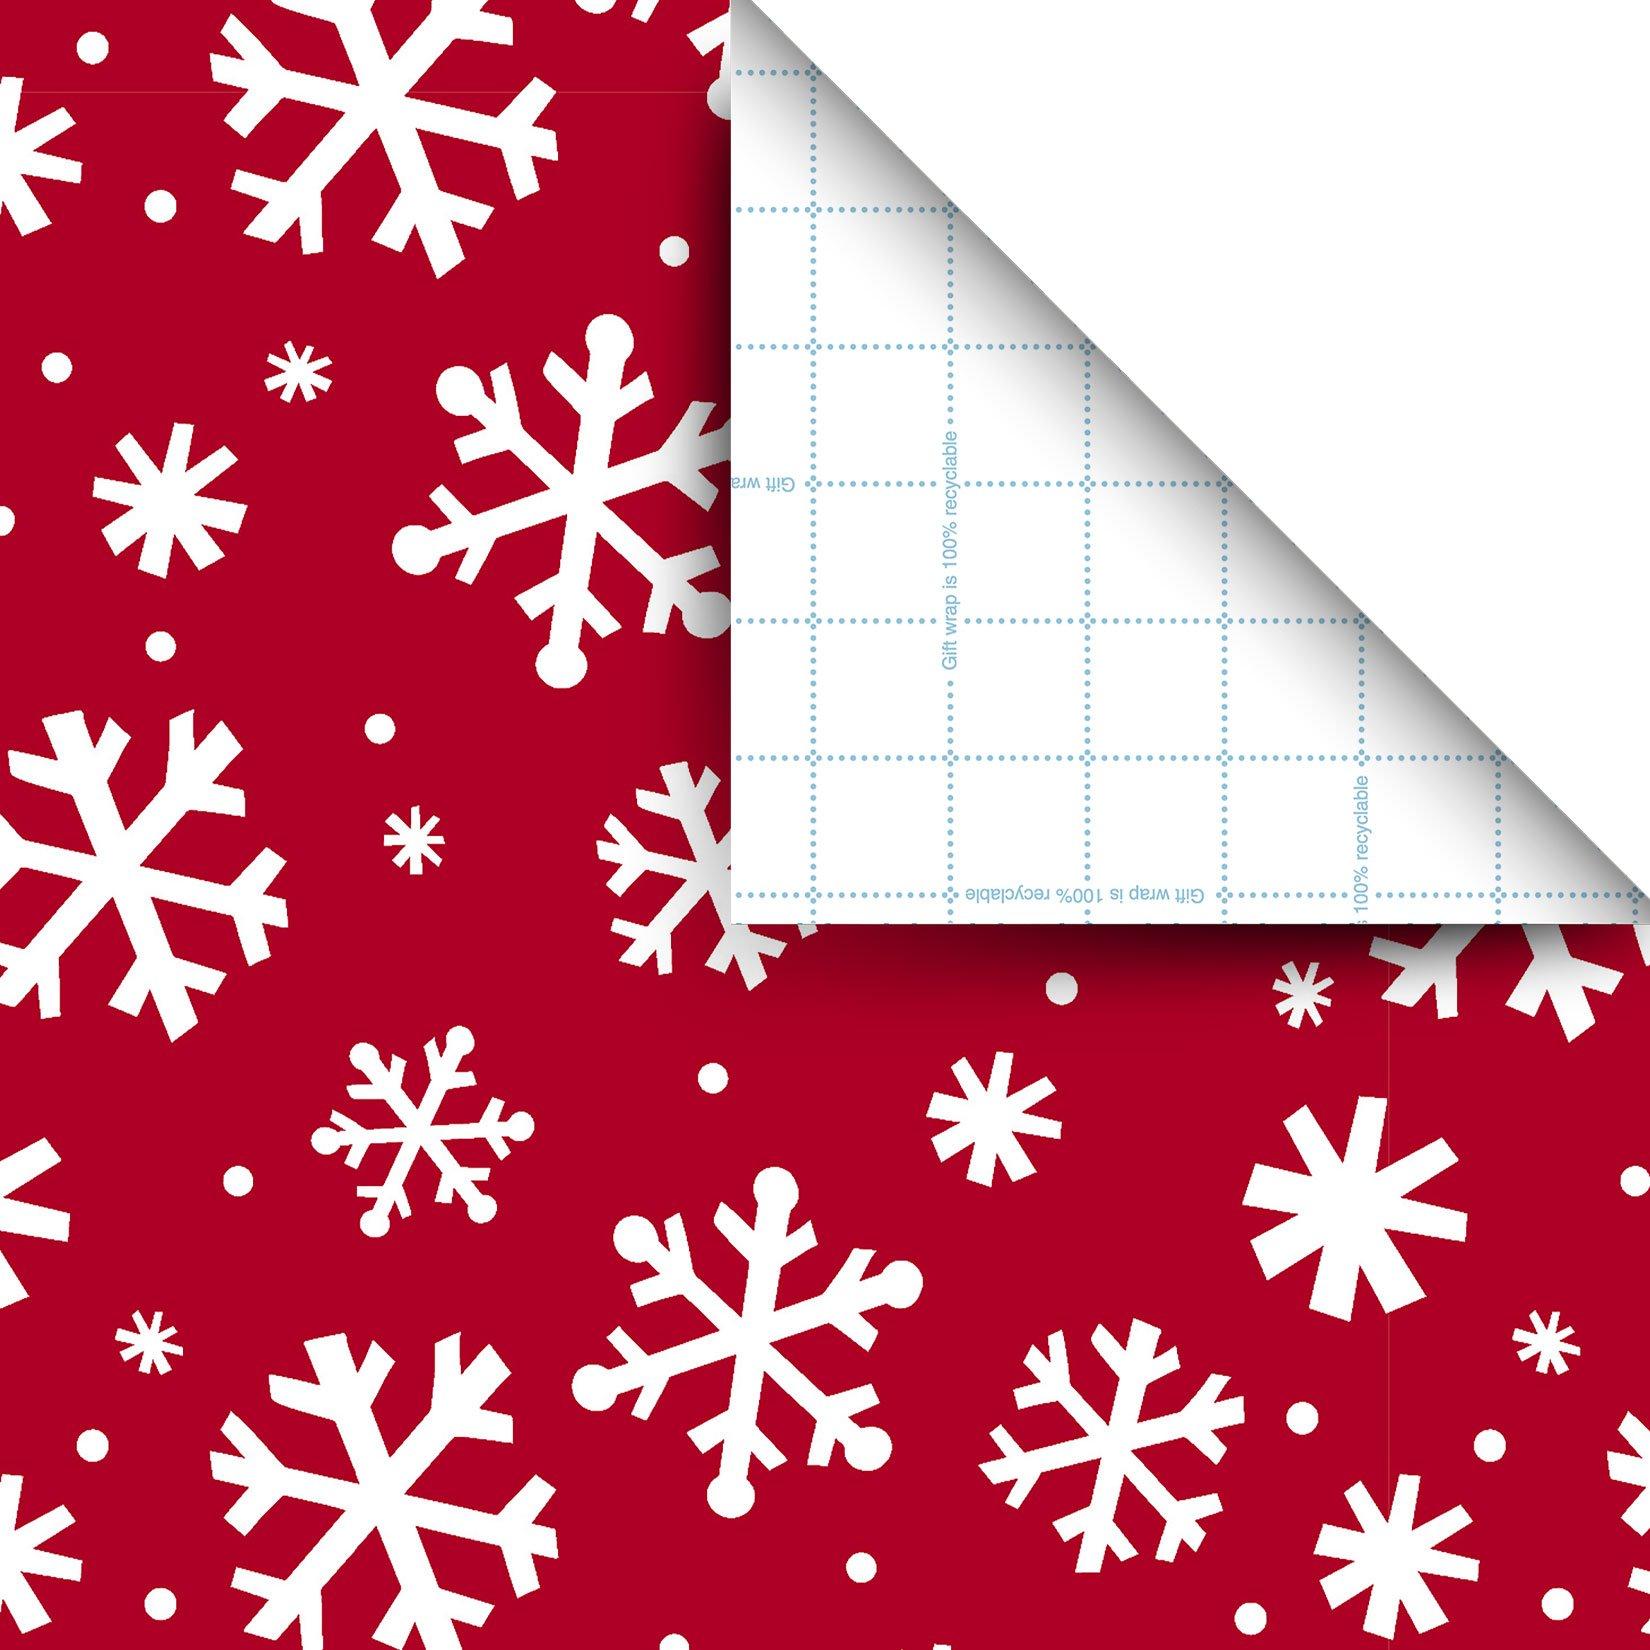 Christmas Snowflakes Gift Wrap, 24x417' Counter Roll